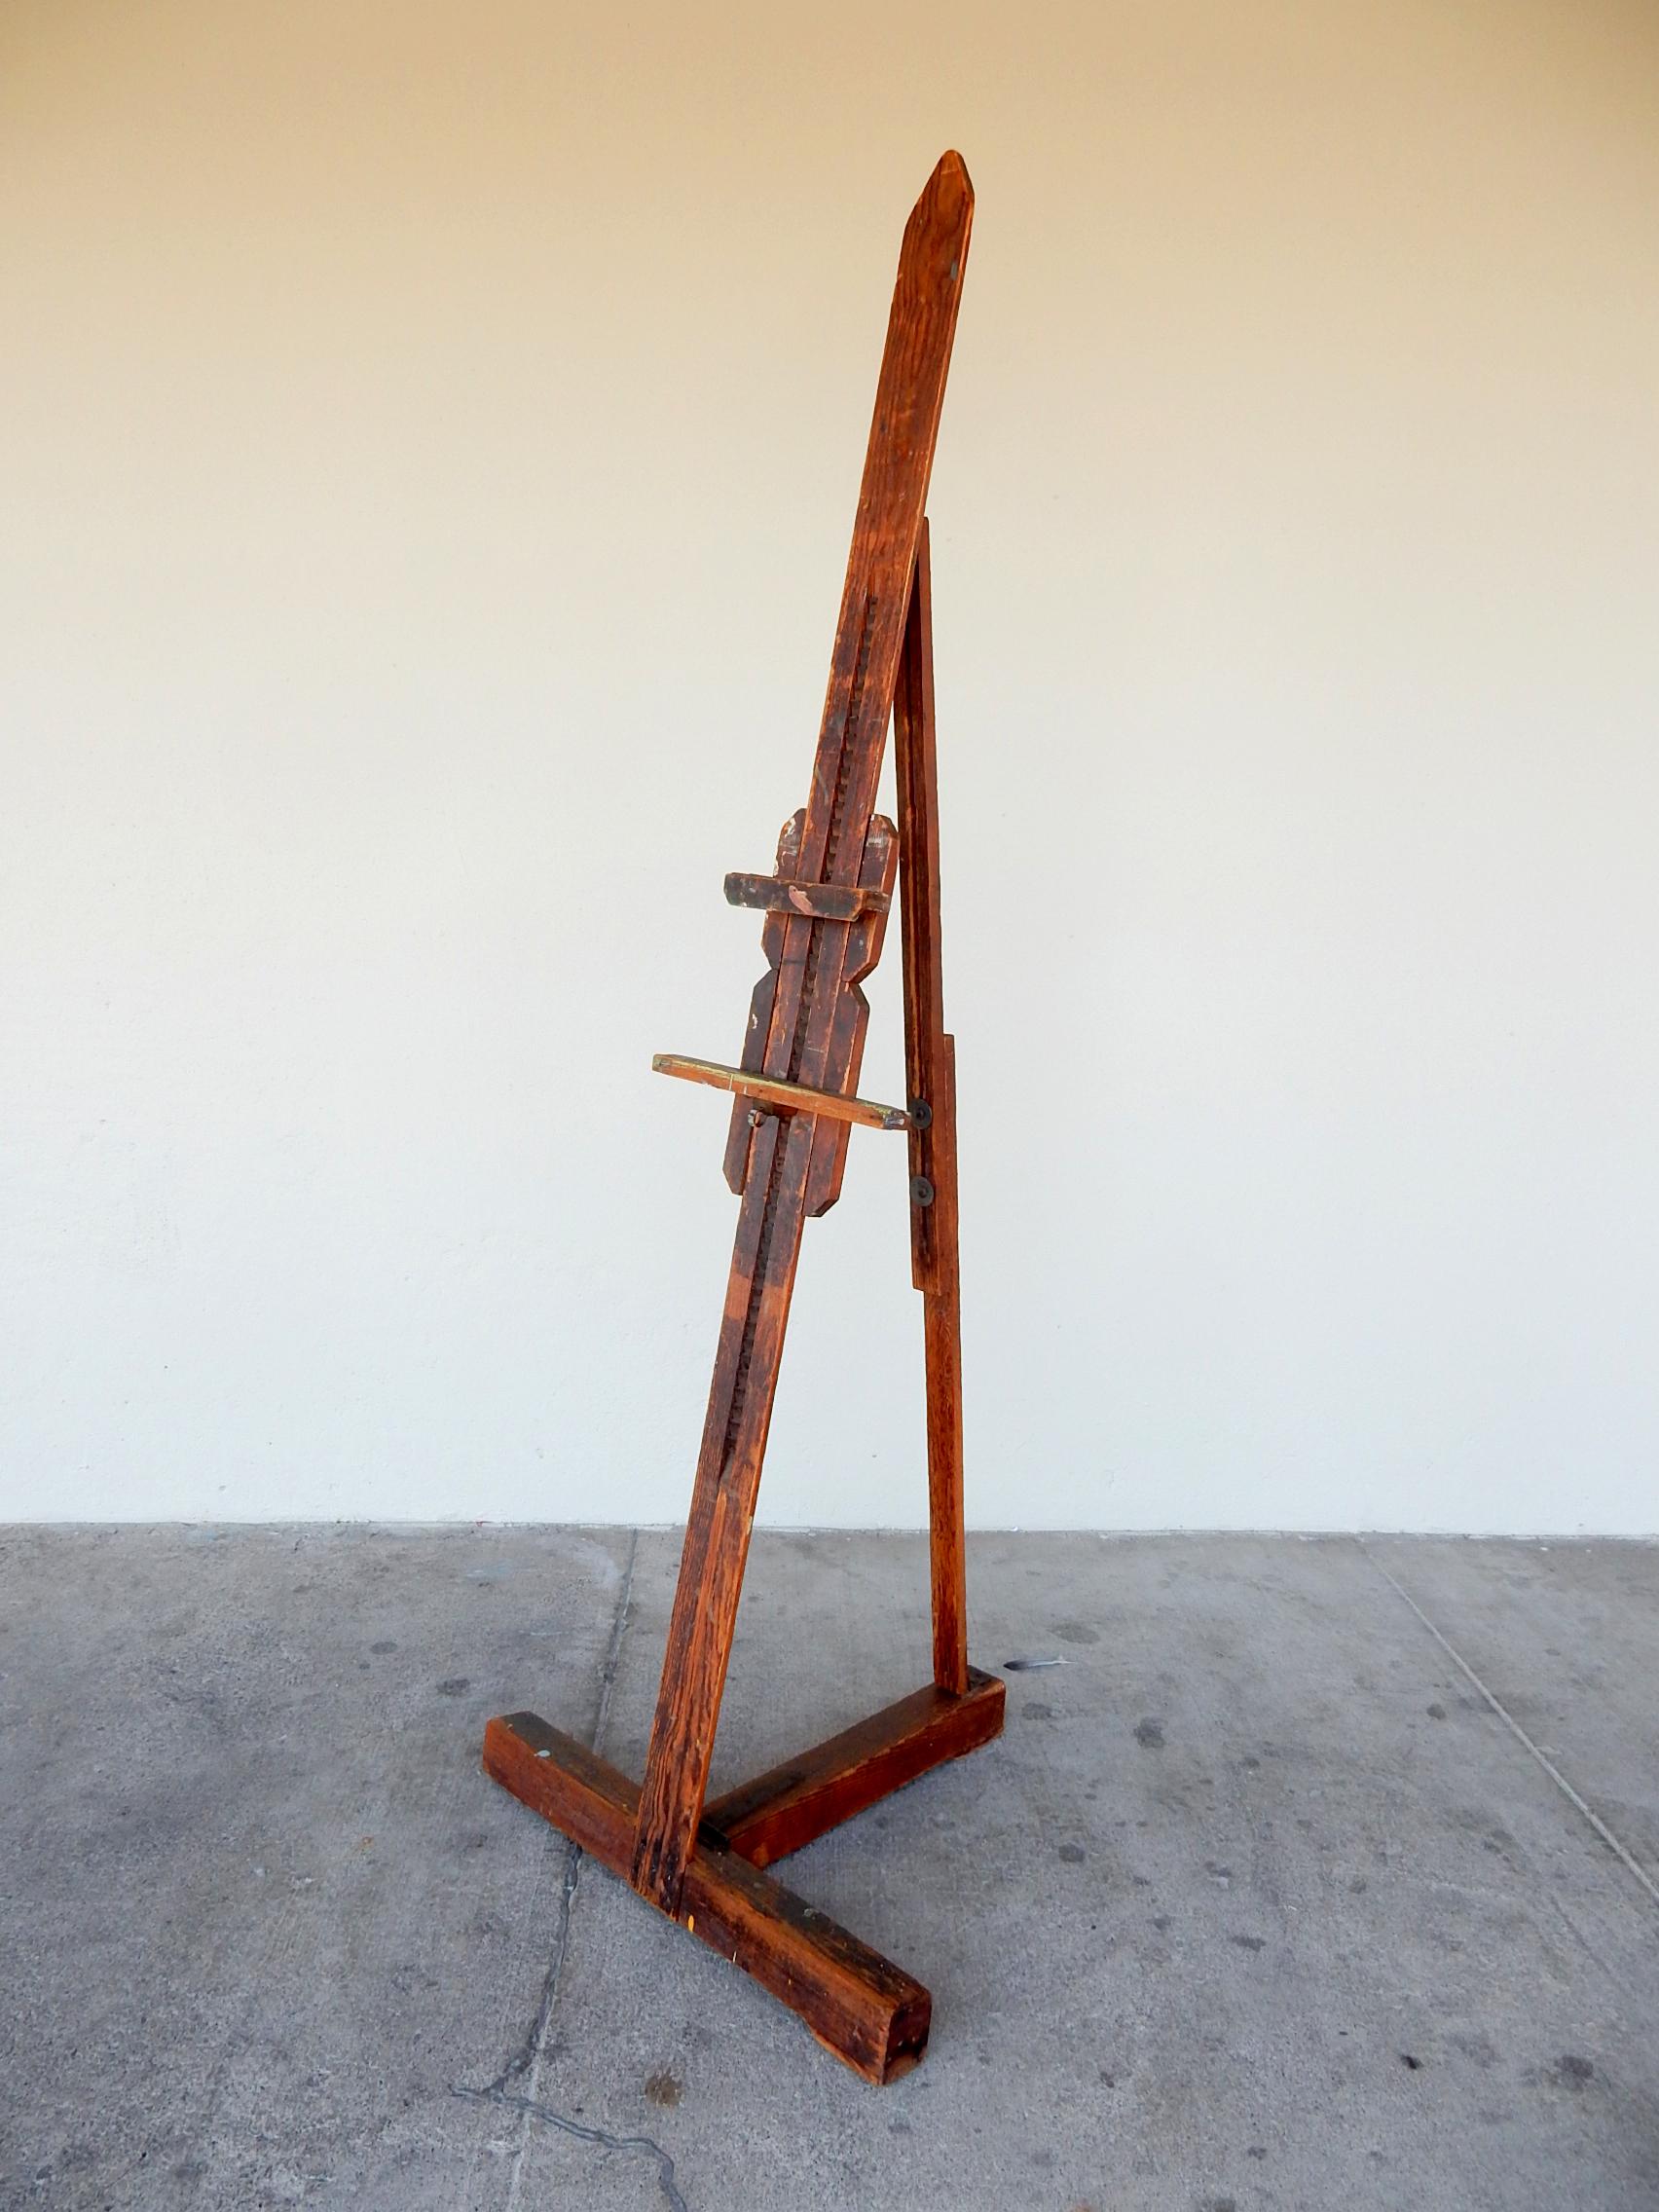 Antique Erwin Riebe of New York City large artist’s studio floor easel,
1920s or early 1930s. Pine and iron construction.
It has amazing patina and paint splatter.
Completely original with no repairs. Well used and worn.
Makes a great art